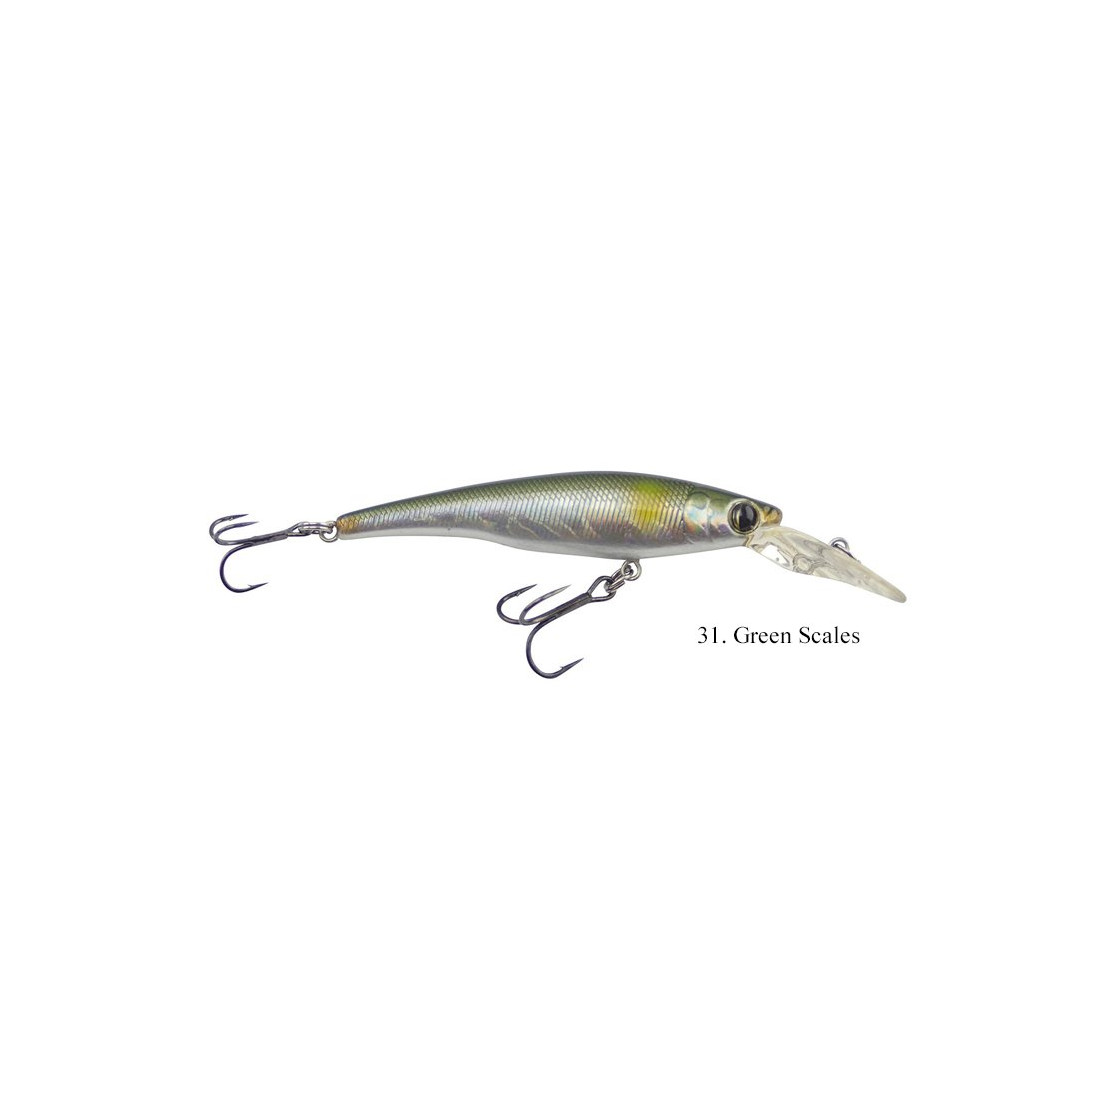 Cultiva Rip'n Minnow Lures - AboutFishing